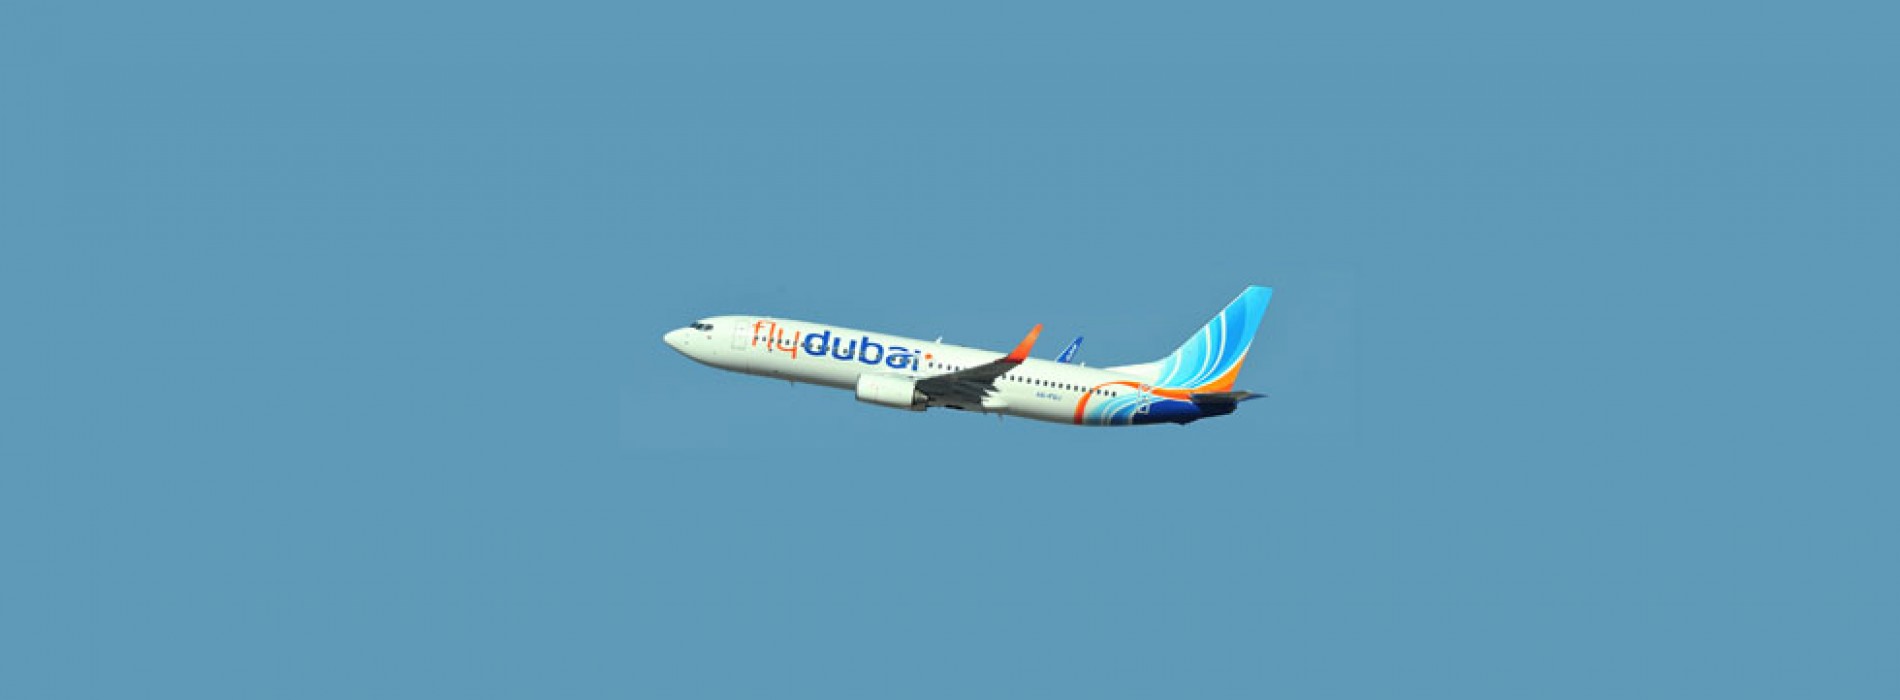 flydubai’s network matures with increased passenger growth and flight frequency